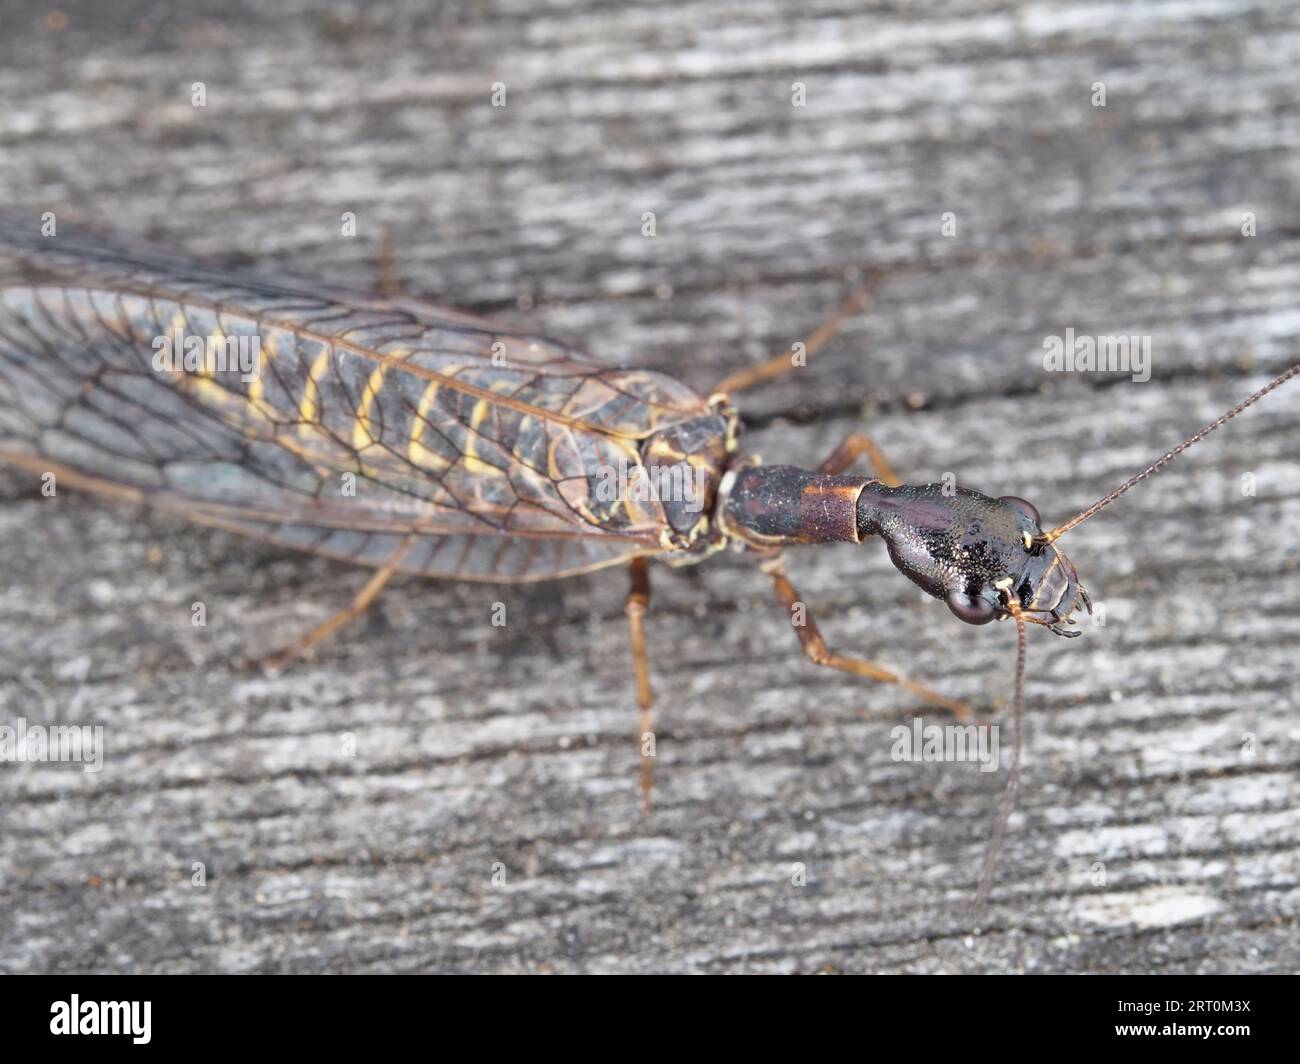 Snakefly, likely Agulla bicolor, on a wooden surface in Washington state, USA Stock Photo